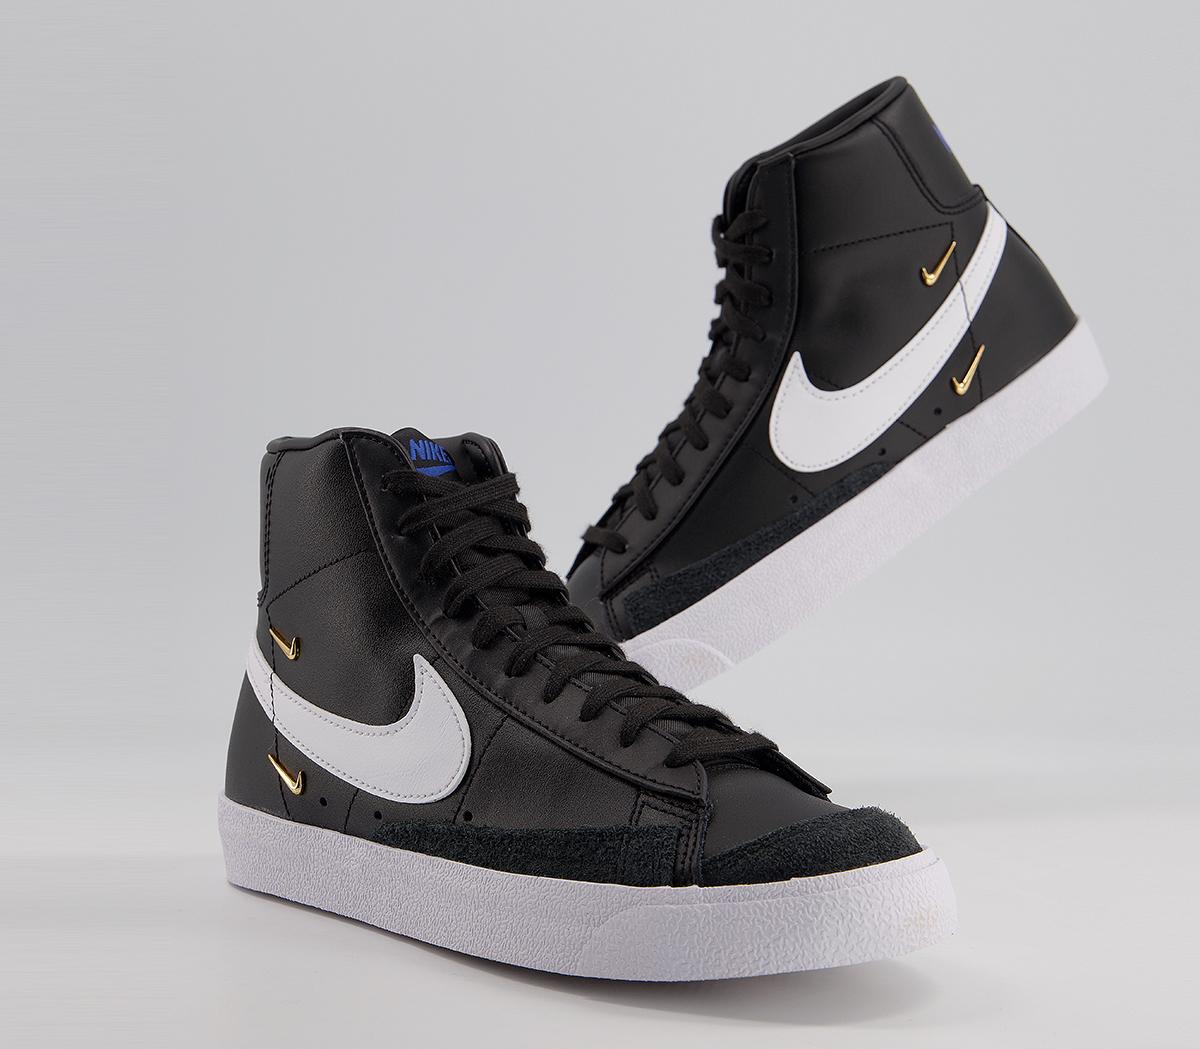 Nike Blazer Mid 77 Trainers Black White Hyper Royal White - Hers trainers